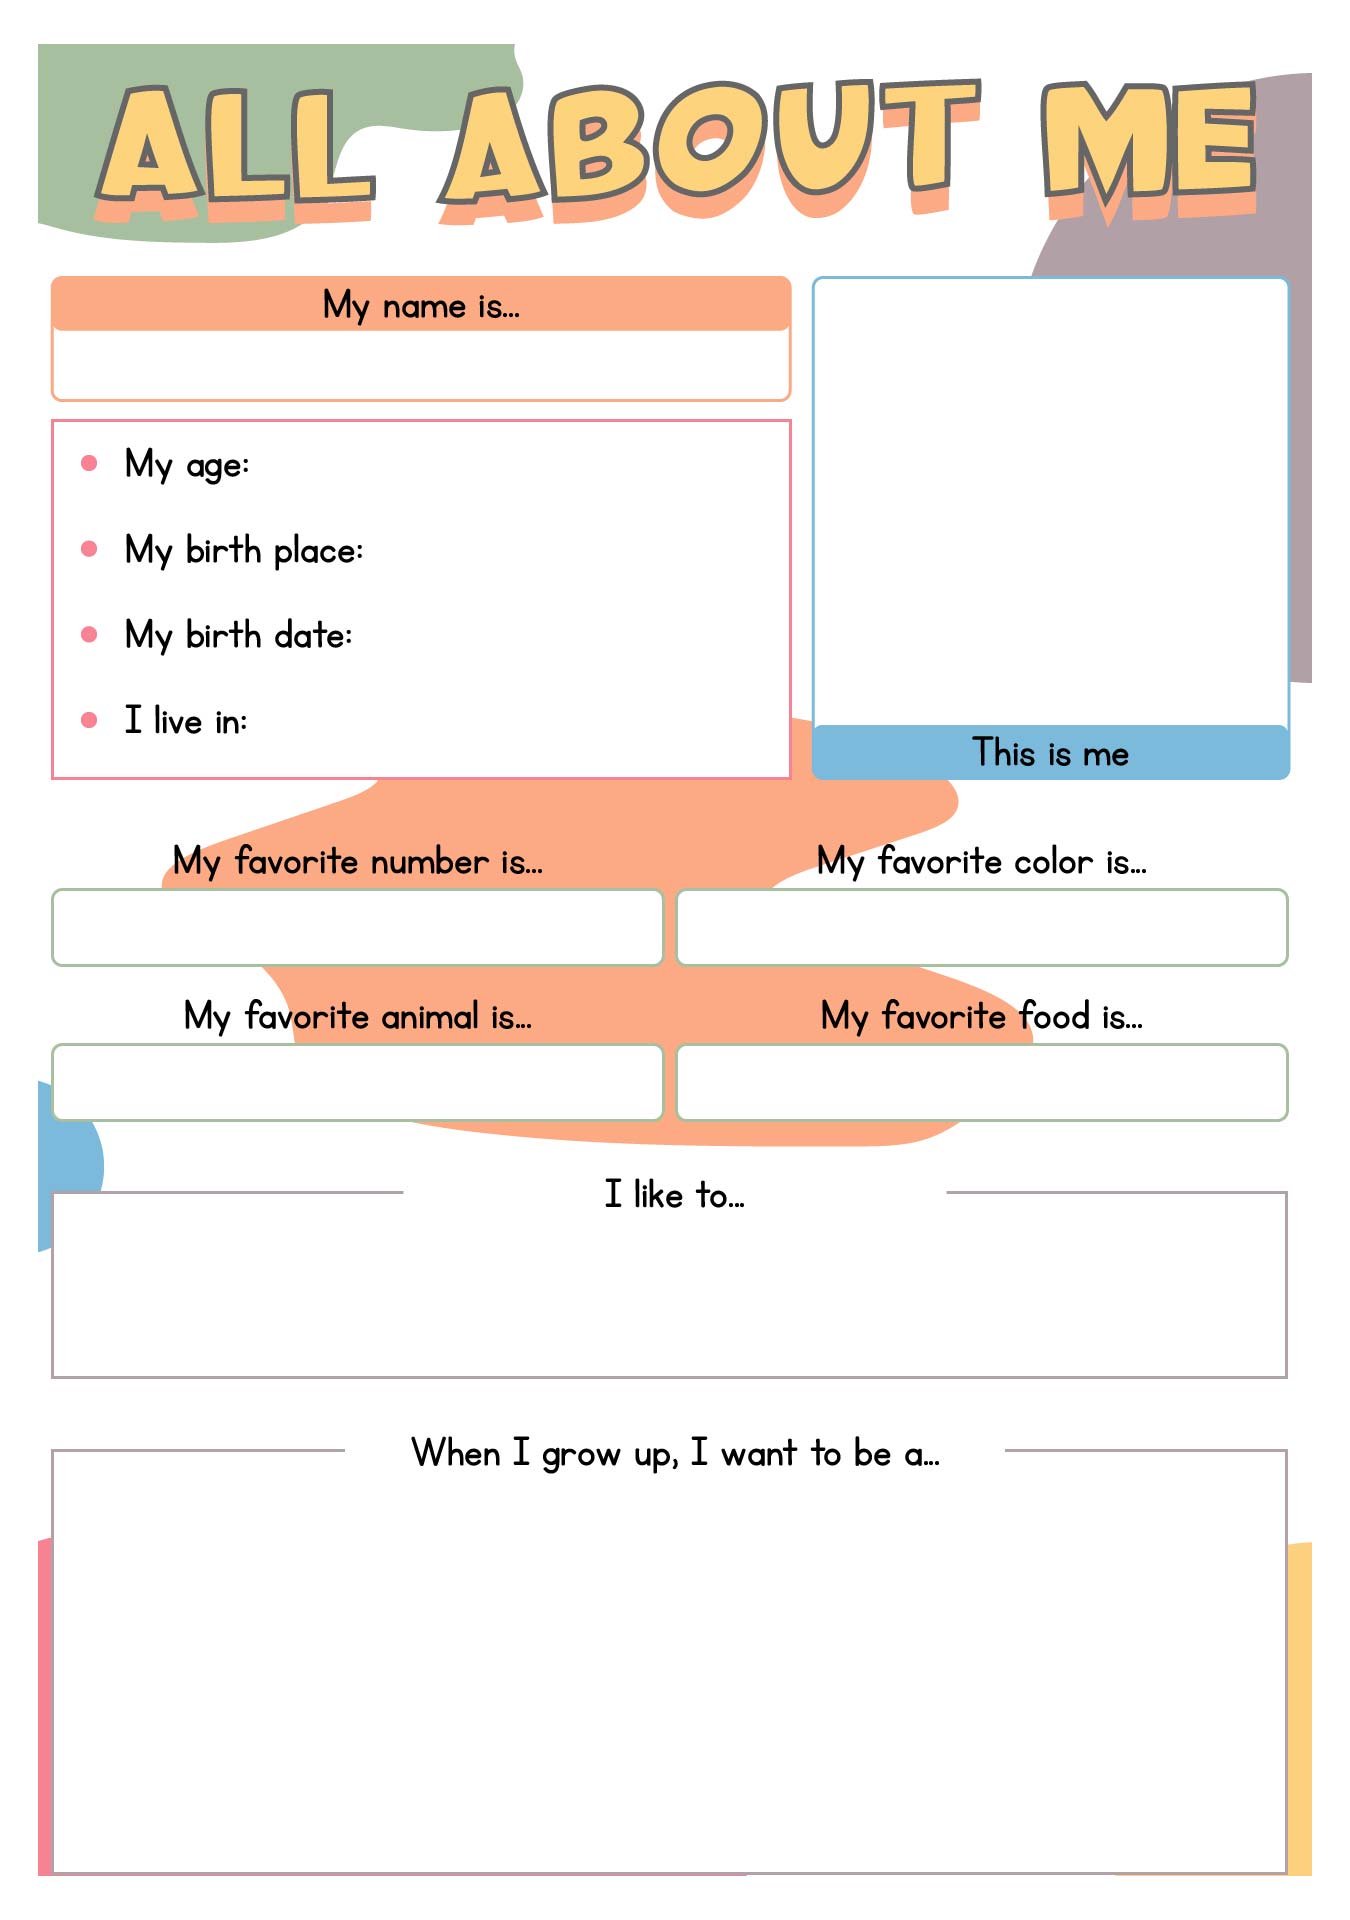 All About Me Poster And Workbook Template Printable